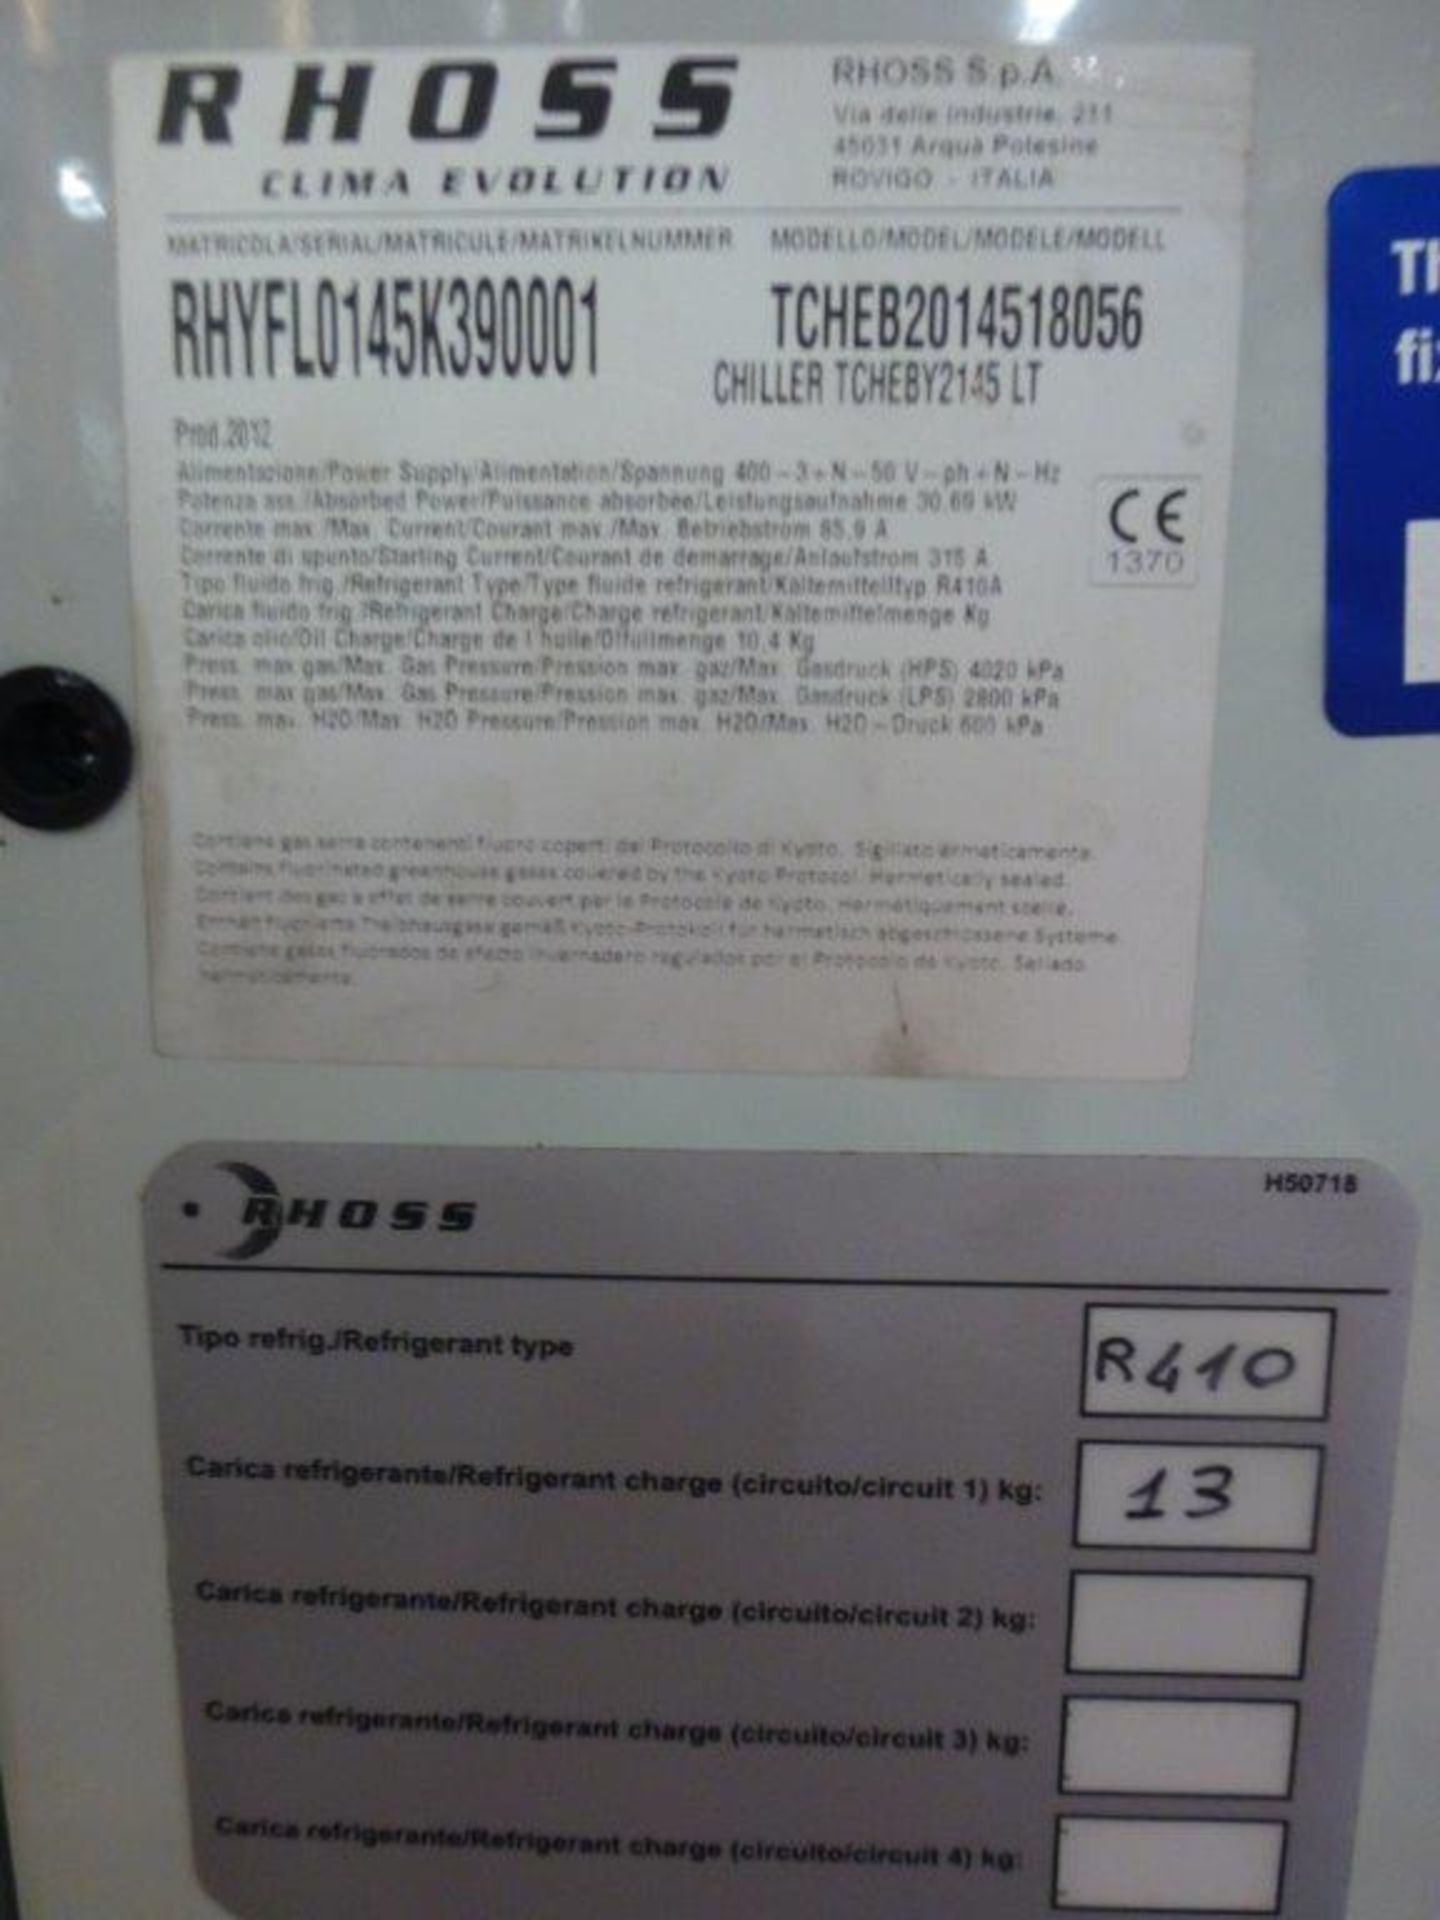 Rhoss Clima Evolutiion TCHCB2014518056 water chiller, serial No RHYFL0145K390001, (2012) Chiller - Image 3 of 3